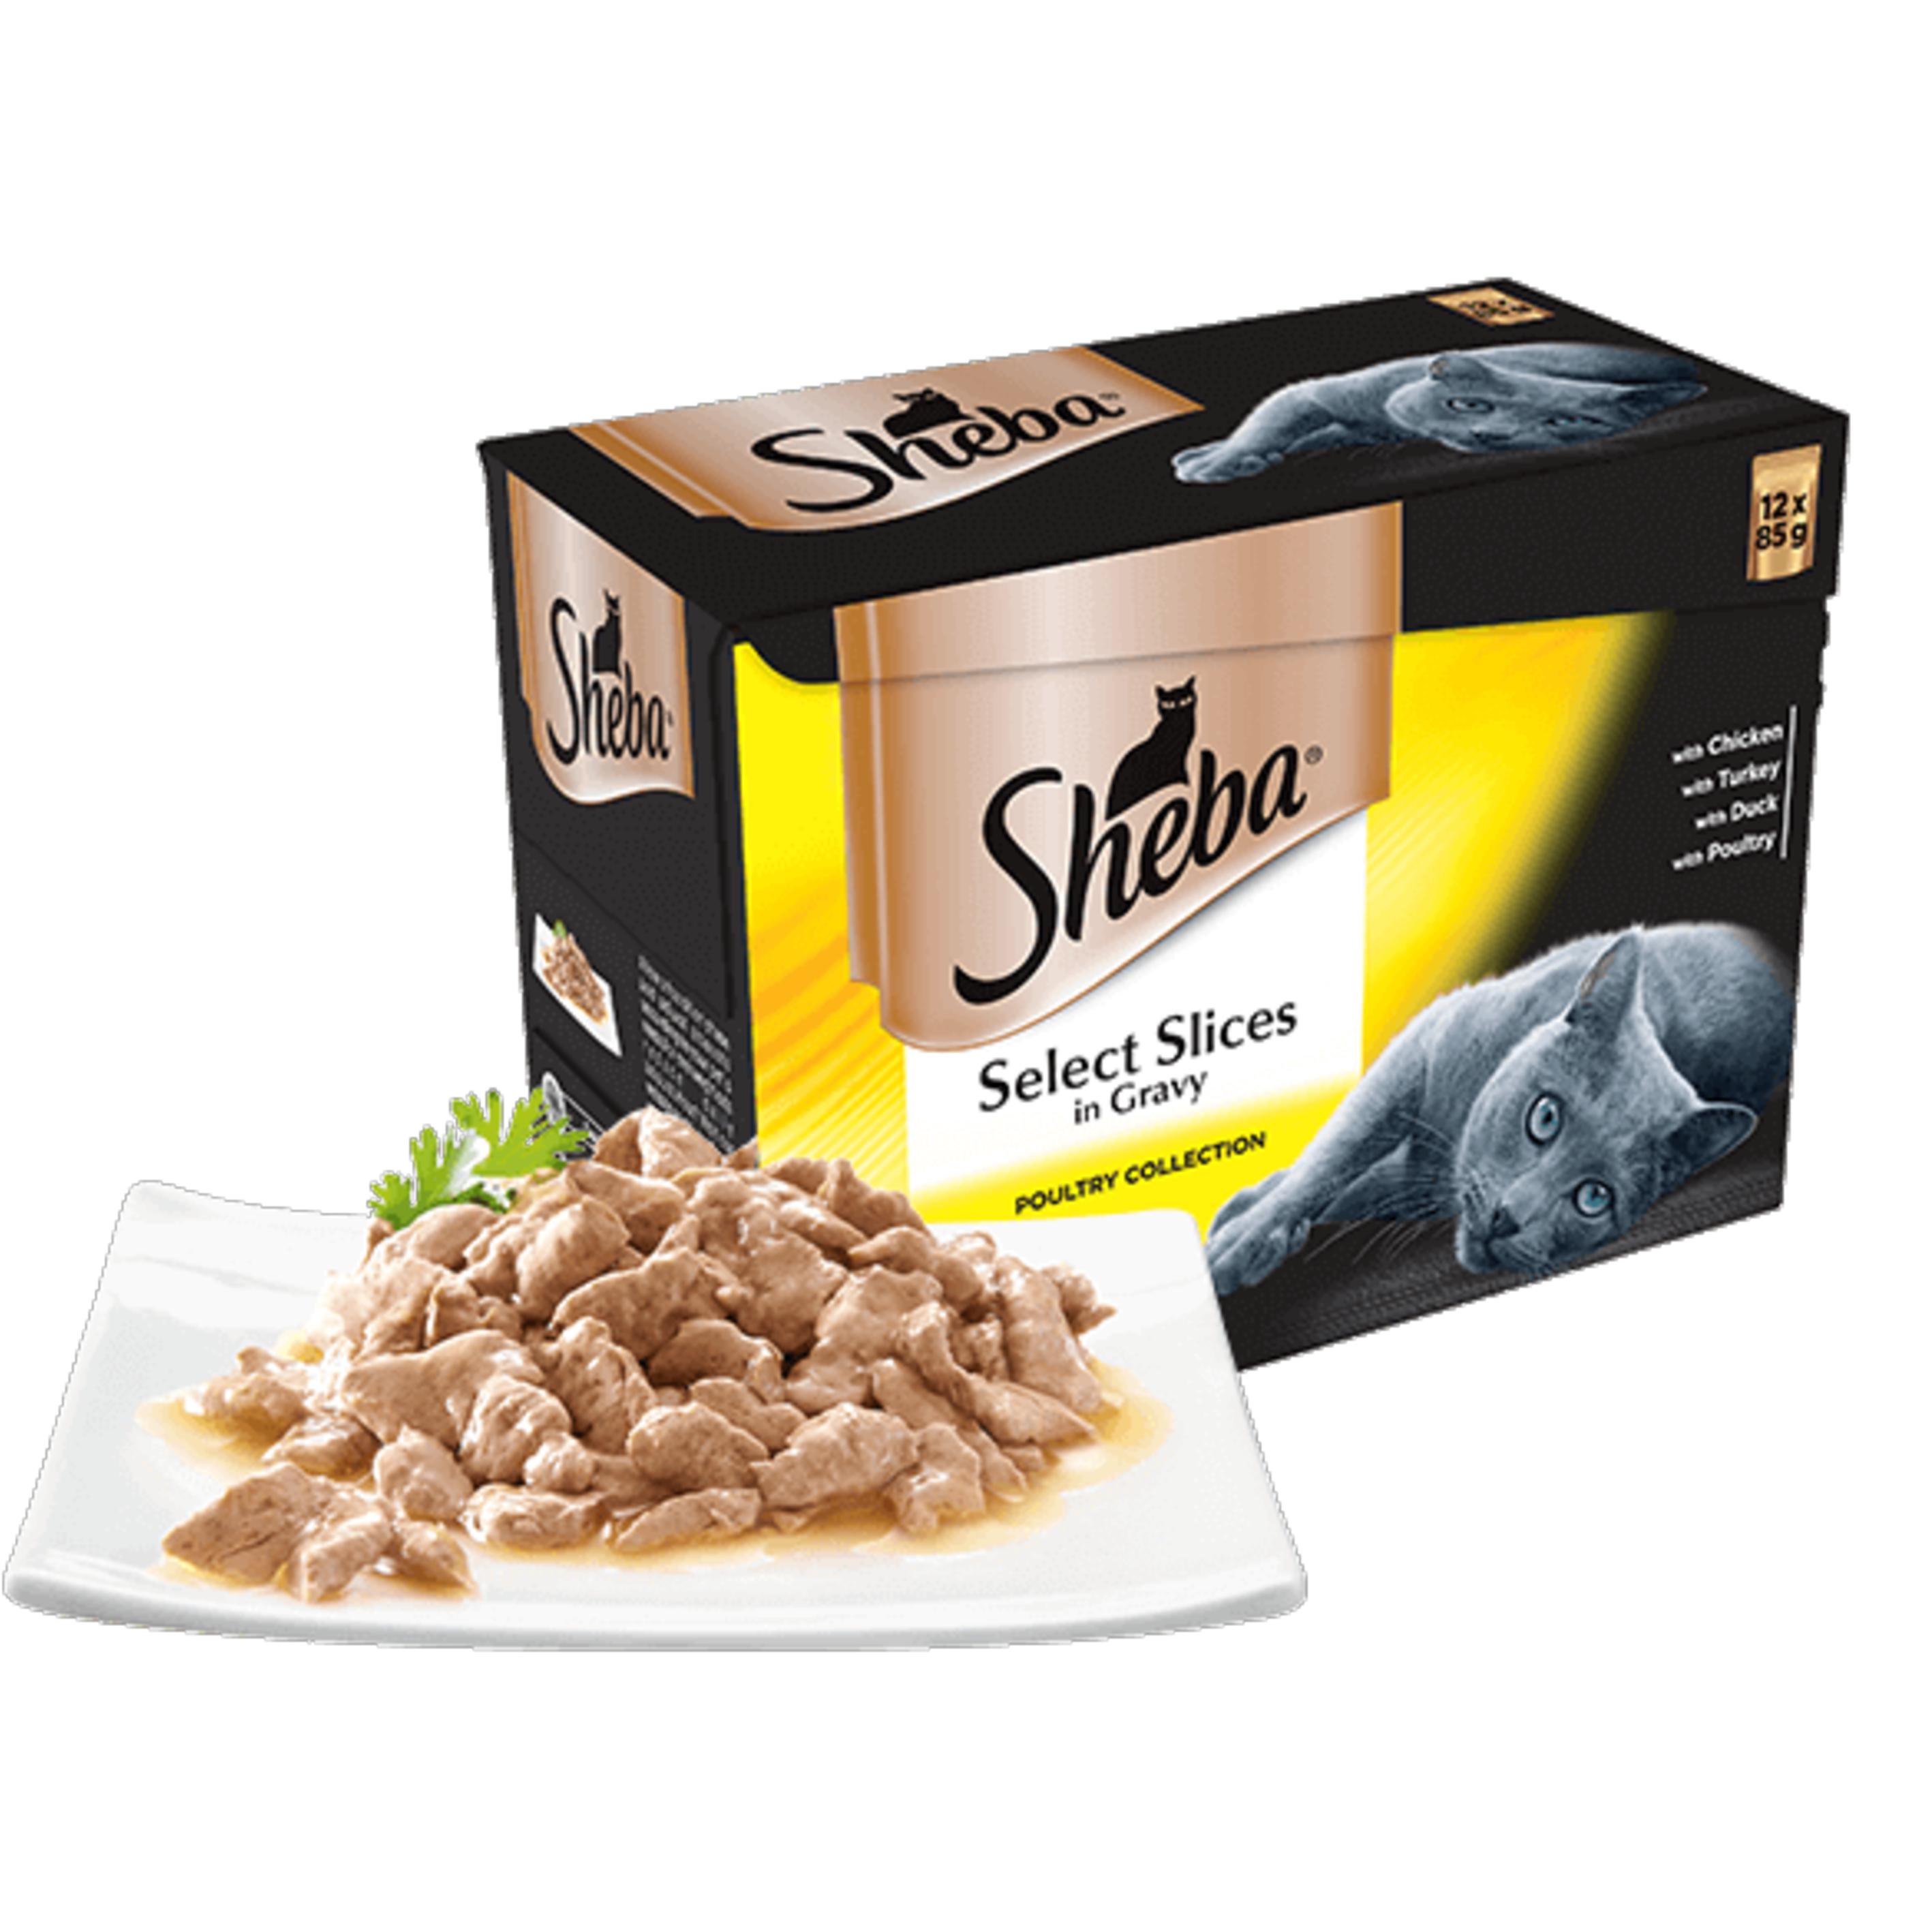 Sheba Select Slices Poultry Collection 